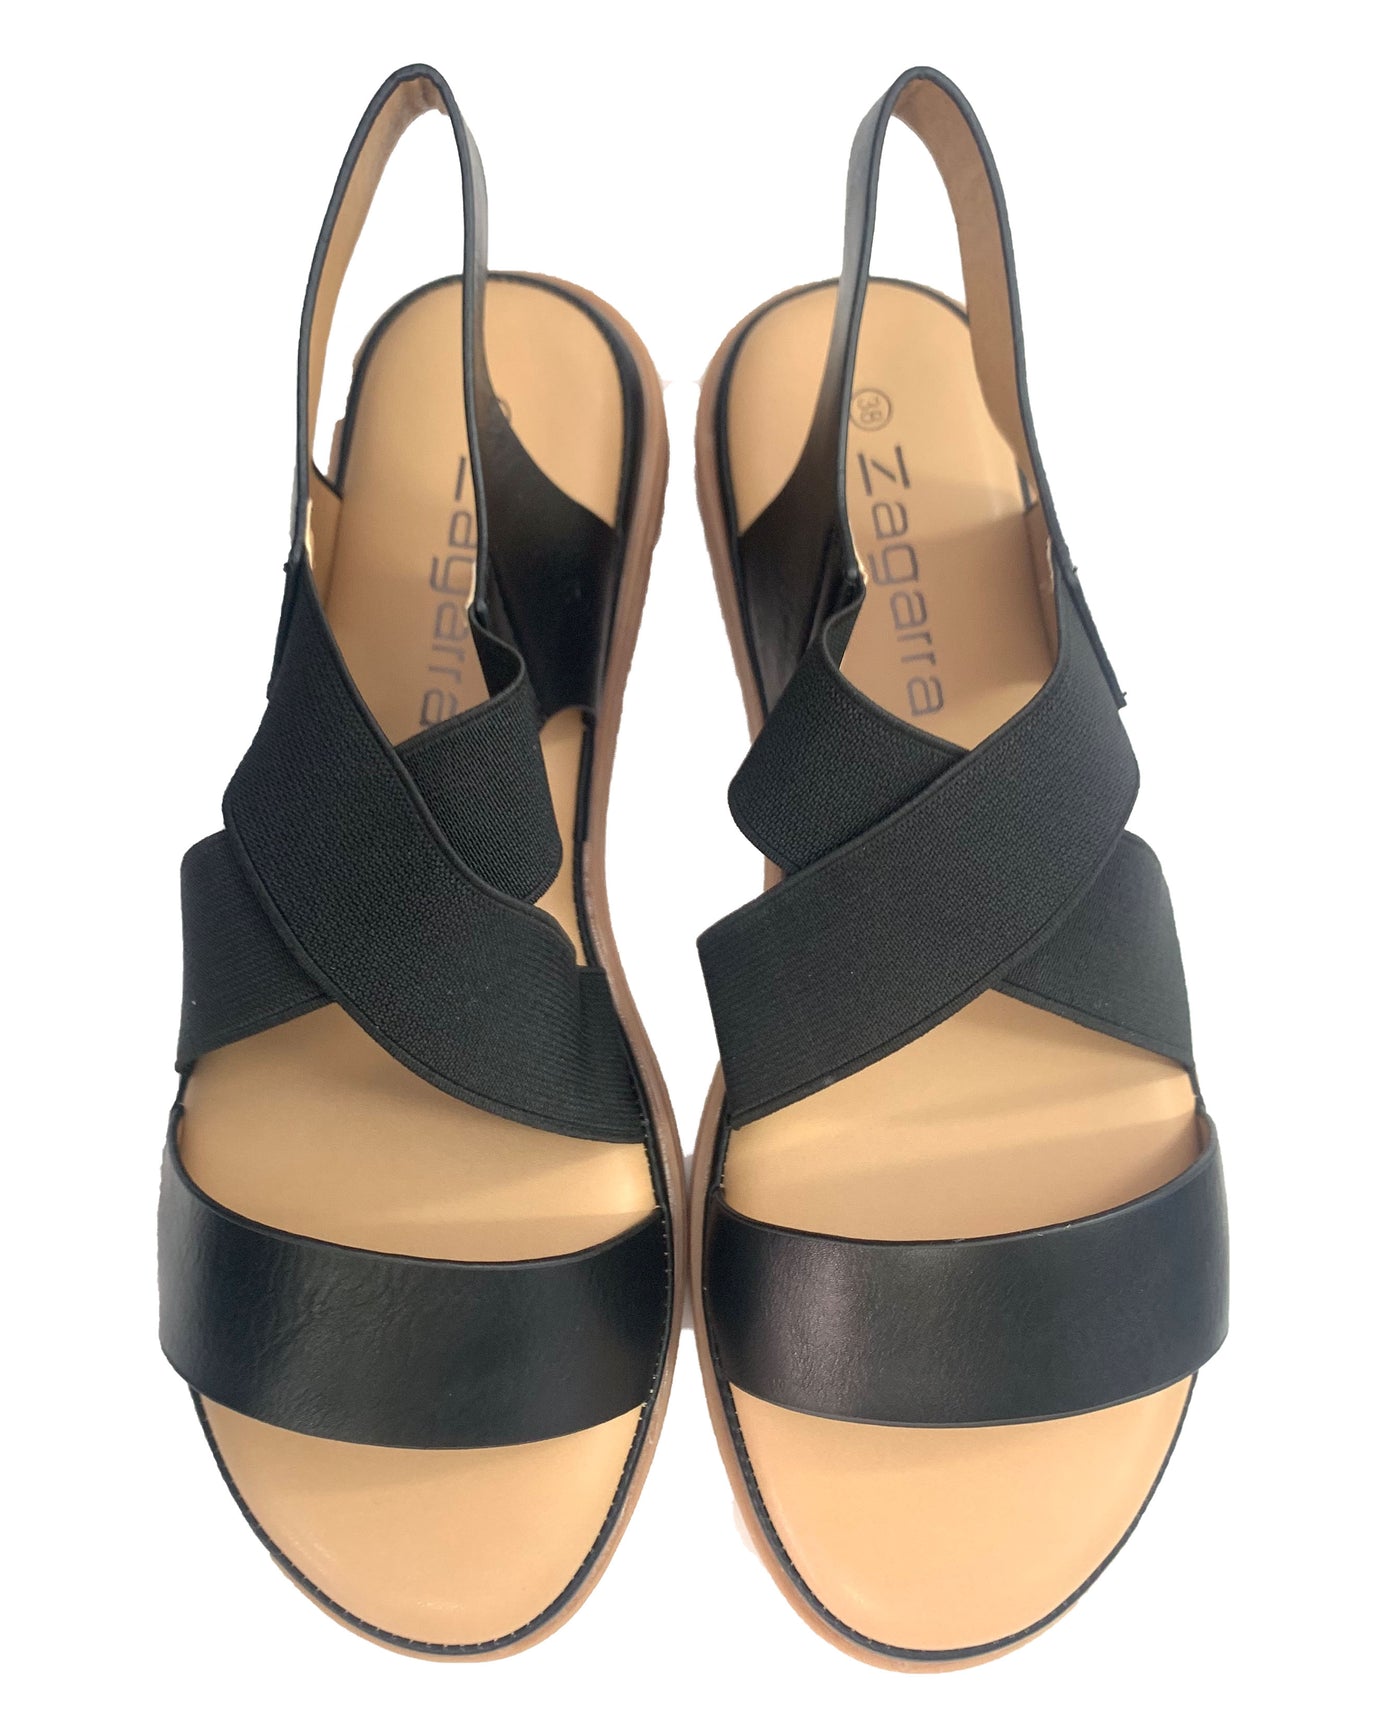 Luxe Black - Collective Shoes 